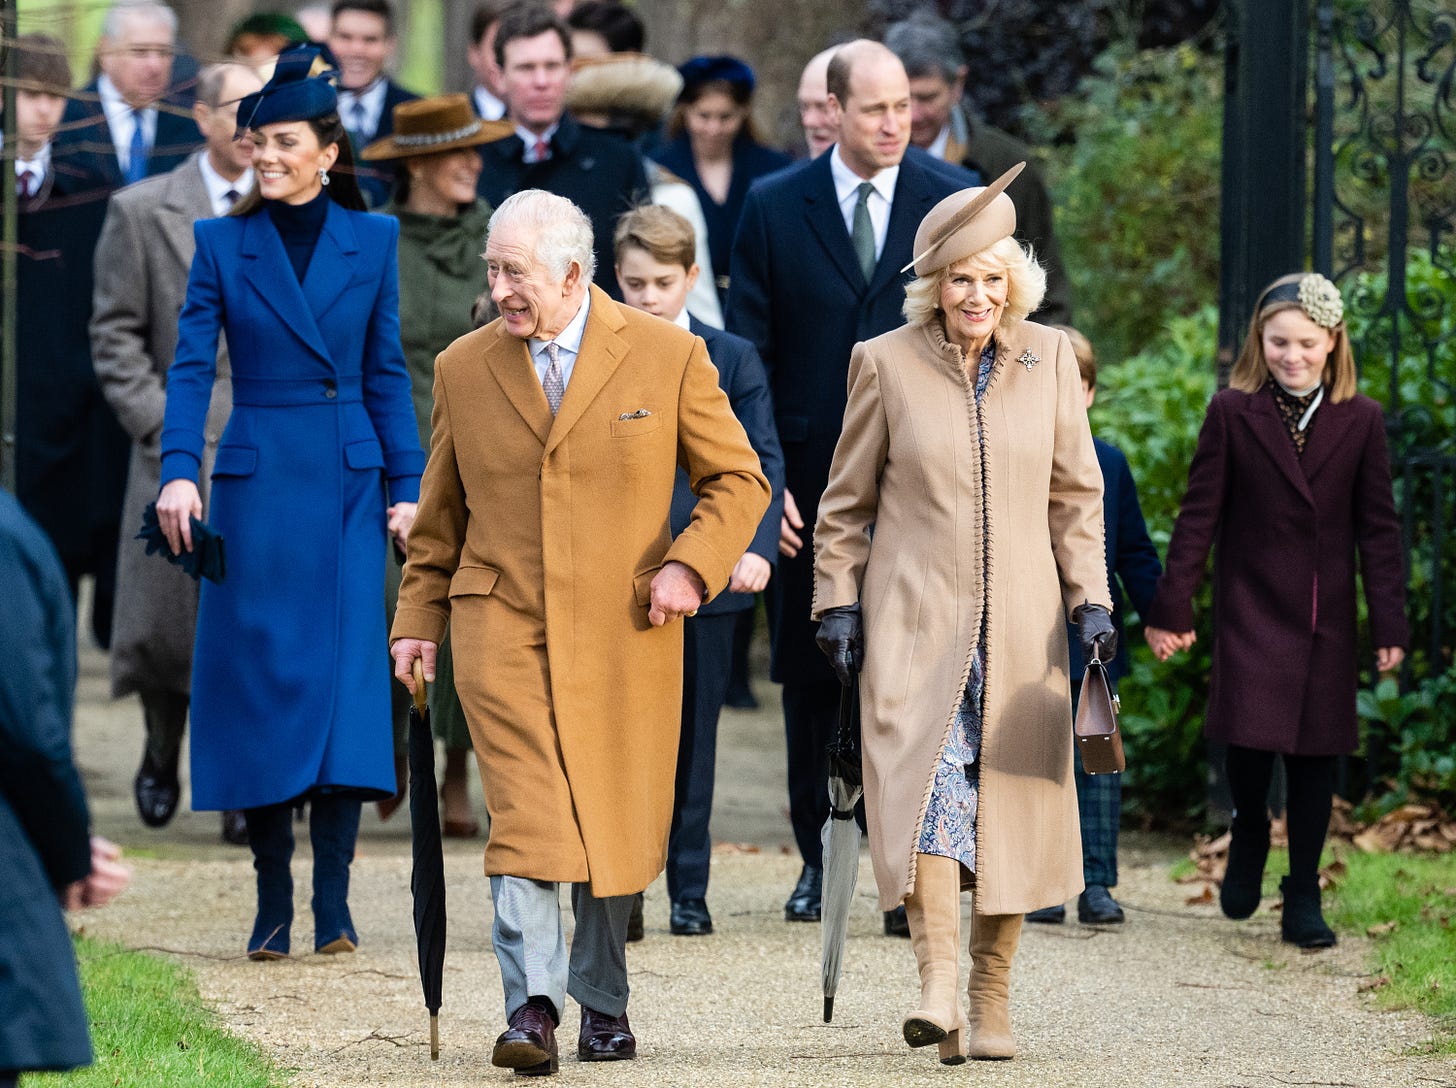 King Charles and Queen Camilla walking ahead of Prince William, Princess Kate and other senior royals